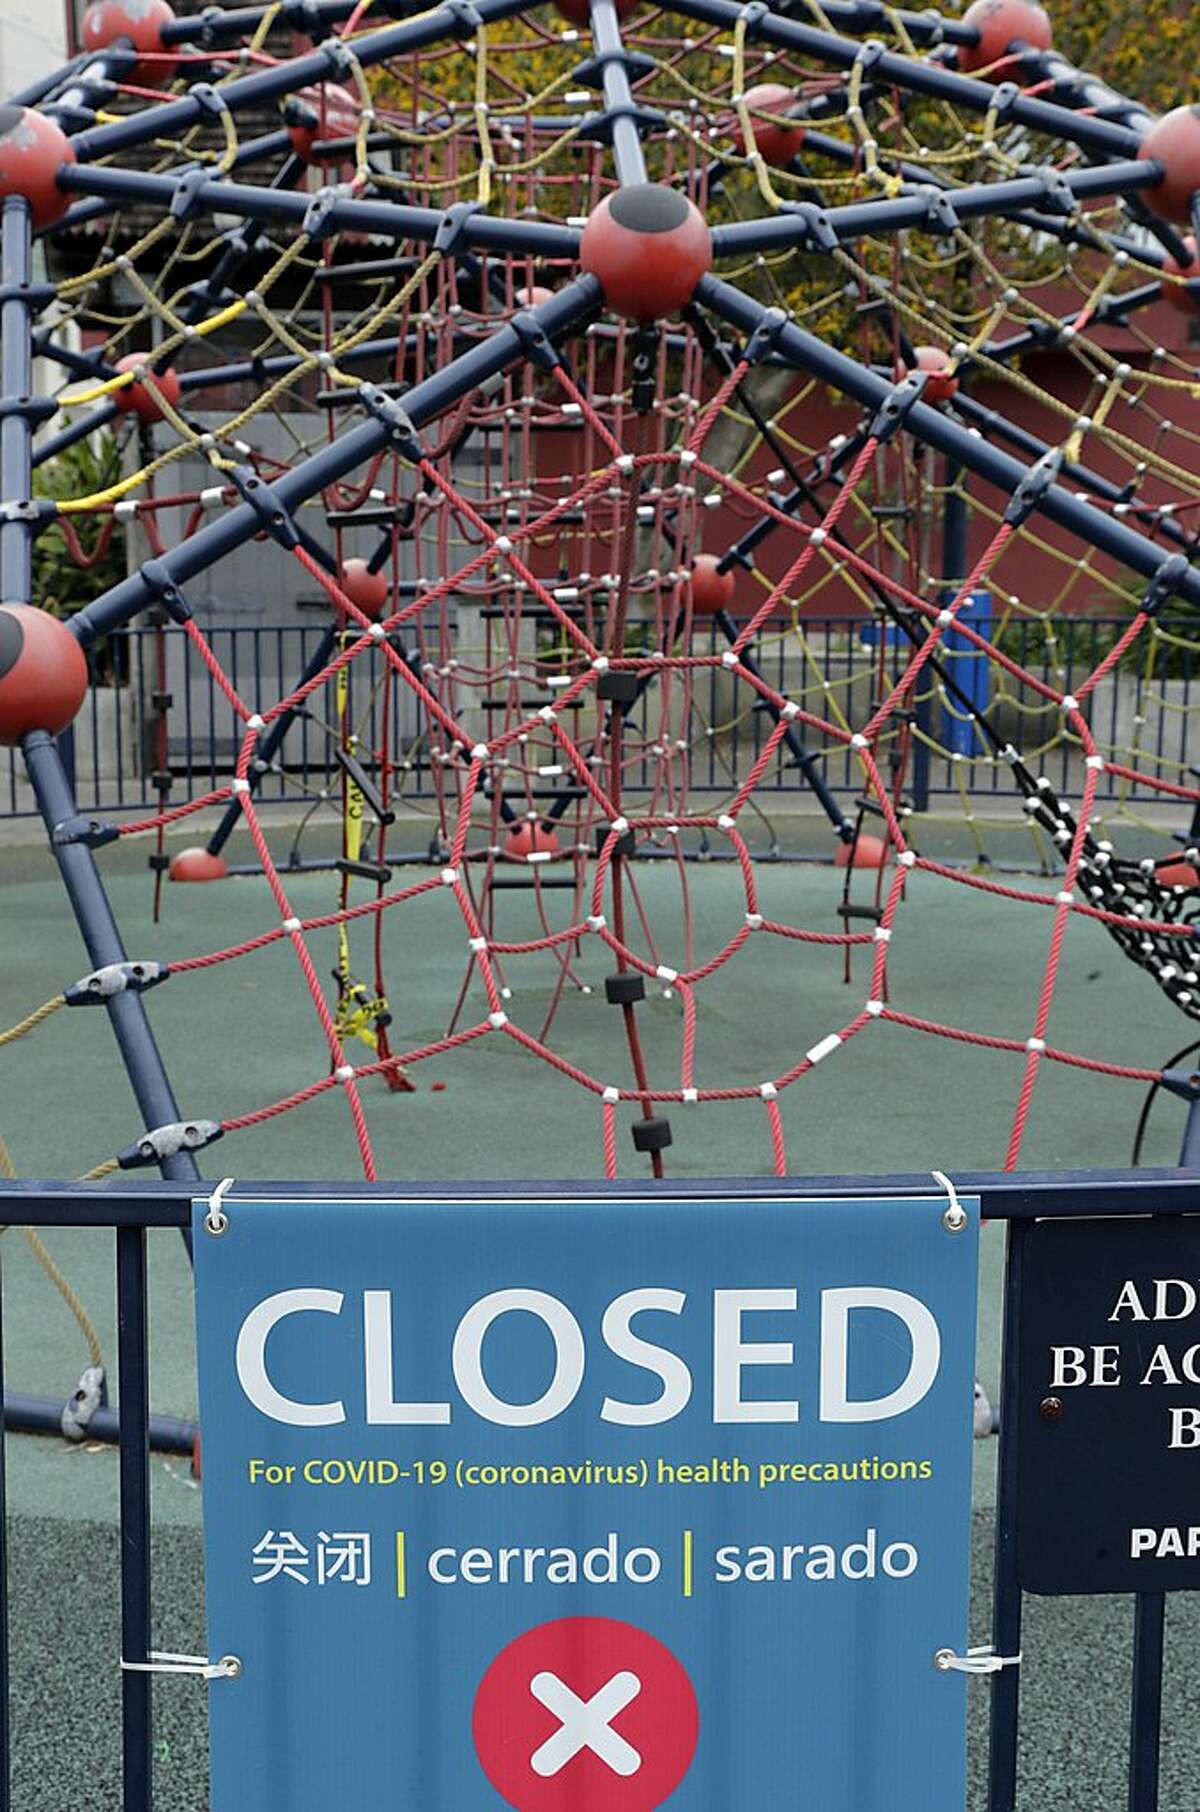 The childrens playground at Patricia's Green Park in Hayes Valley is closed following Mayor London Breed’s decision to have city parks close children’s playgrounds to prevent the spread of the coronavirus in San Francisco, Calif., on Monday, March 23, 2020.